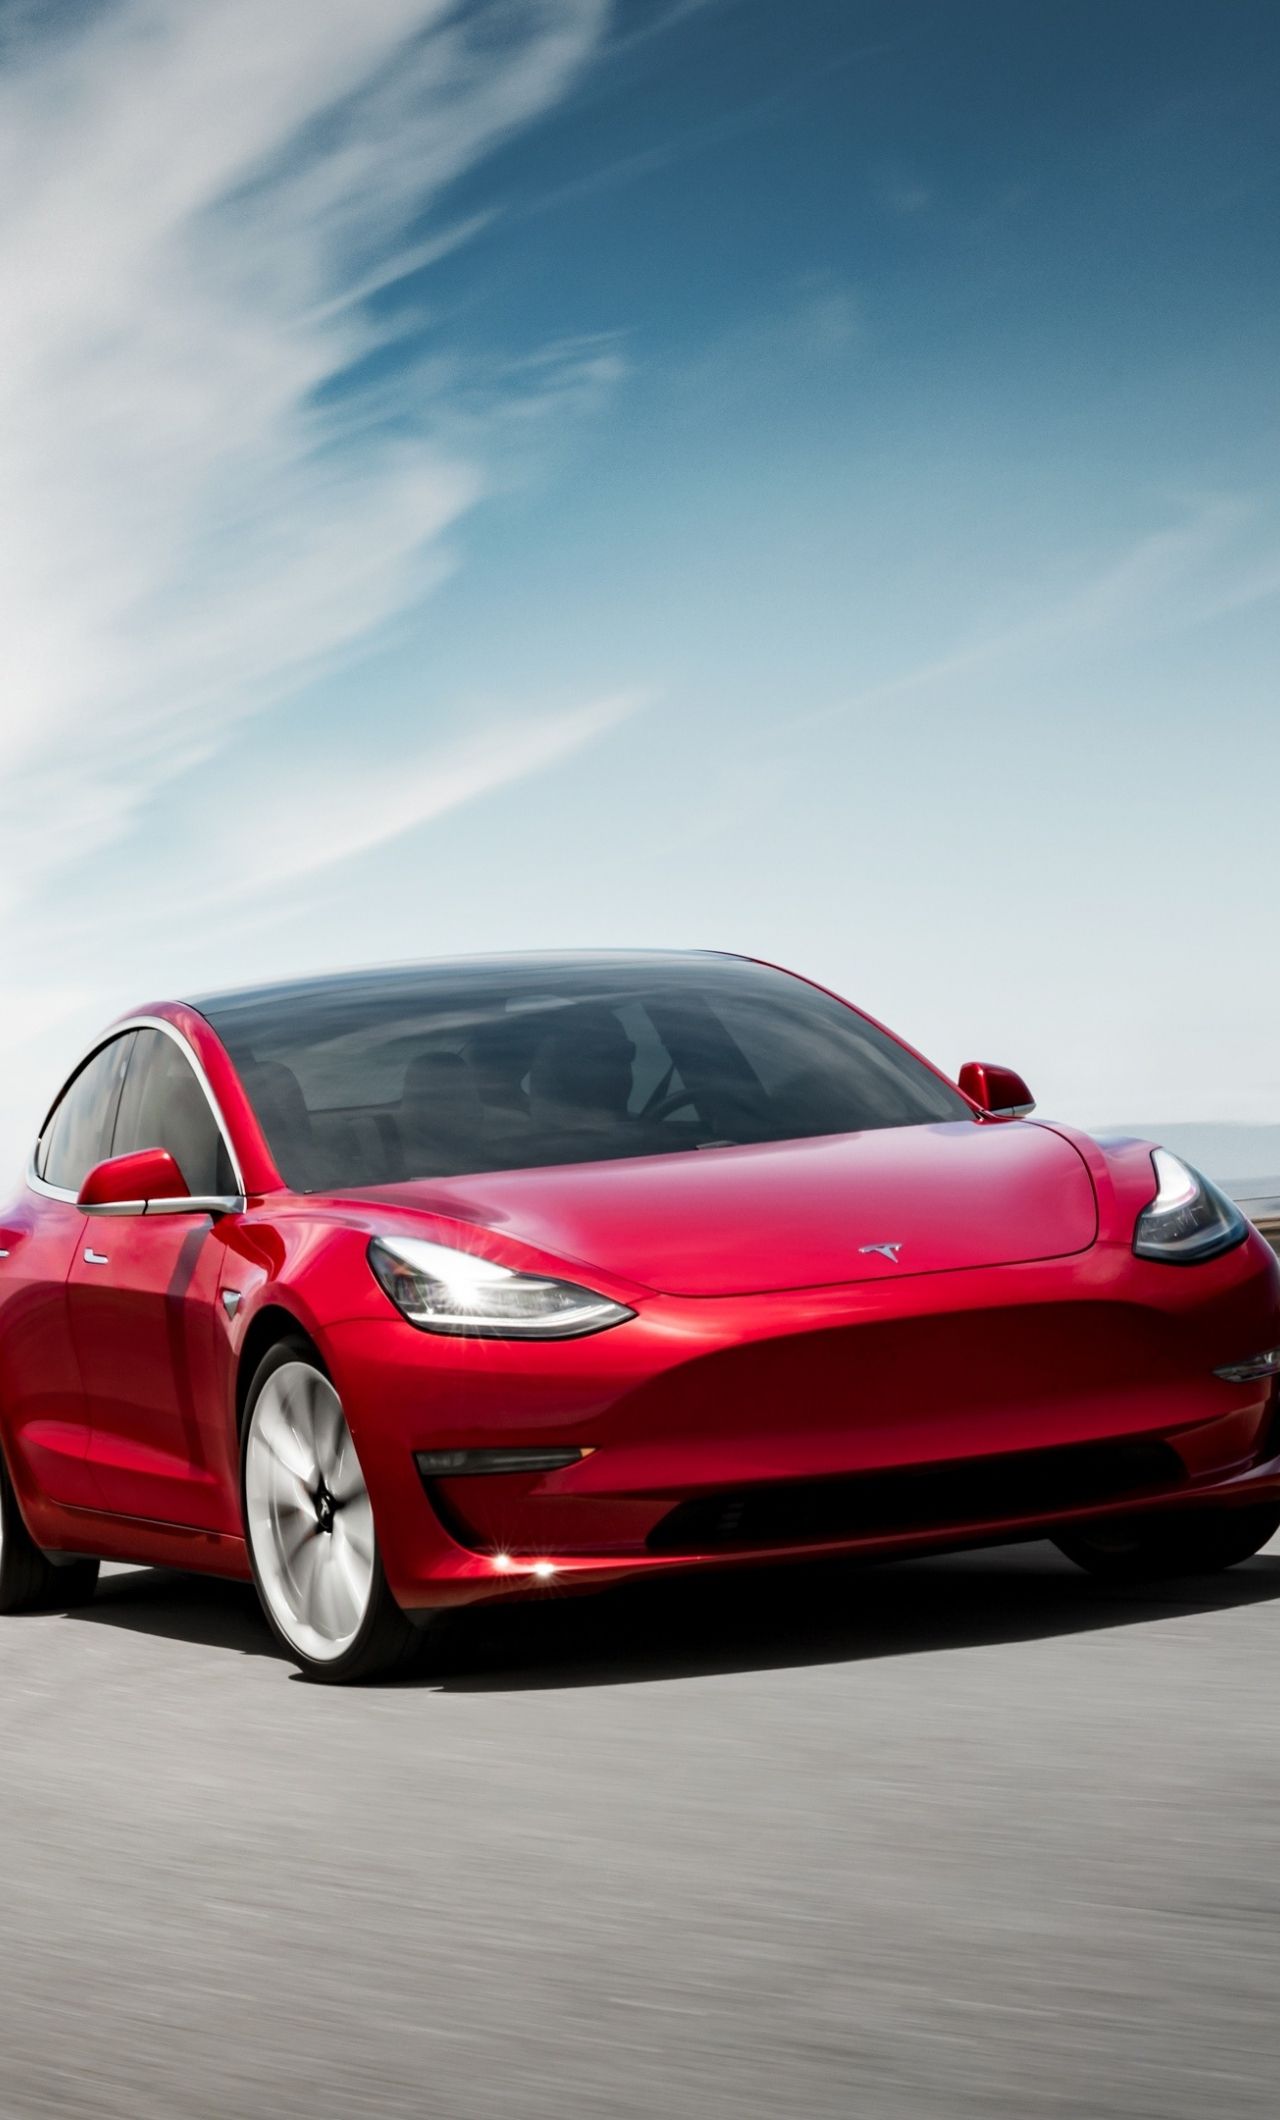 Download 1280x2120 Wallpaper Tesla Model On Road, Red, Iphone 6 Plus, 1280x2120 HD Image, Background, 15856